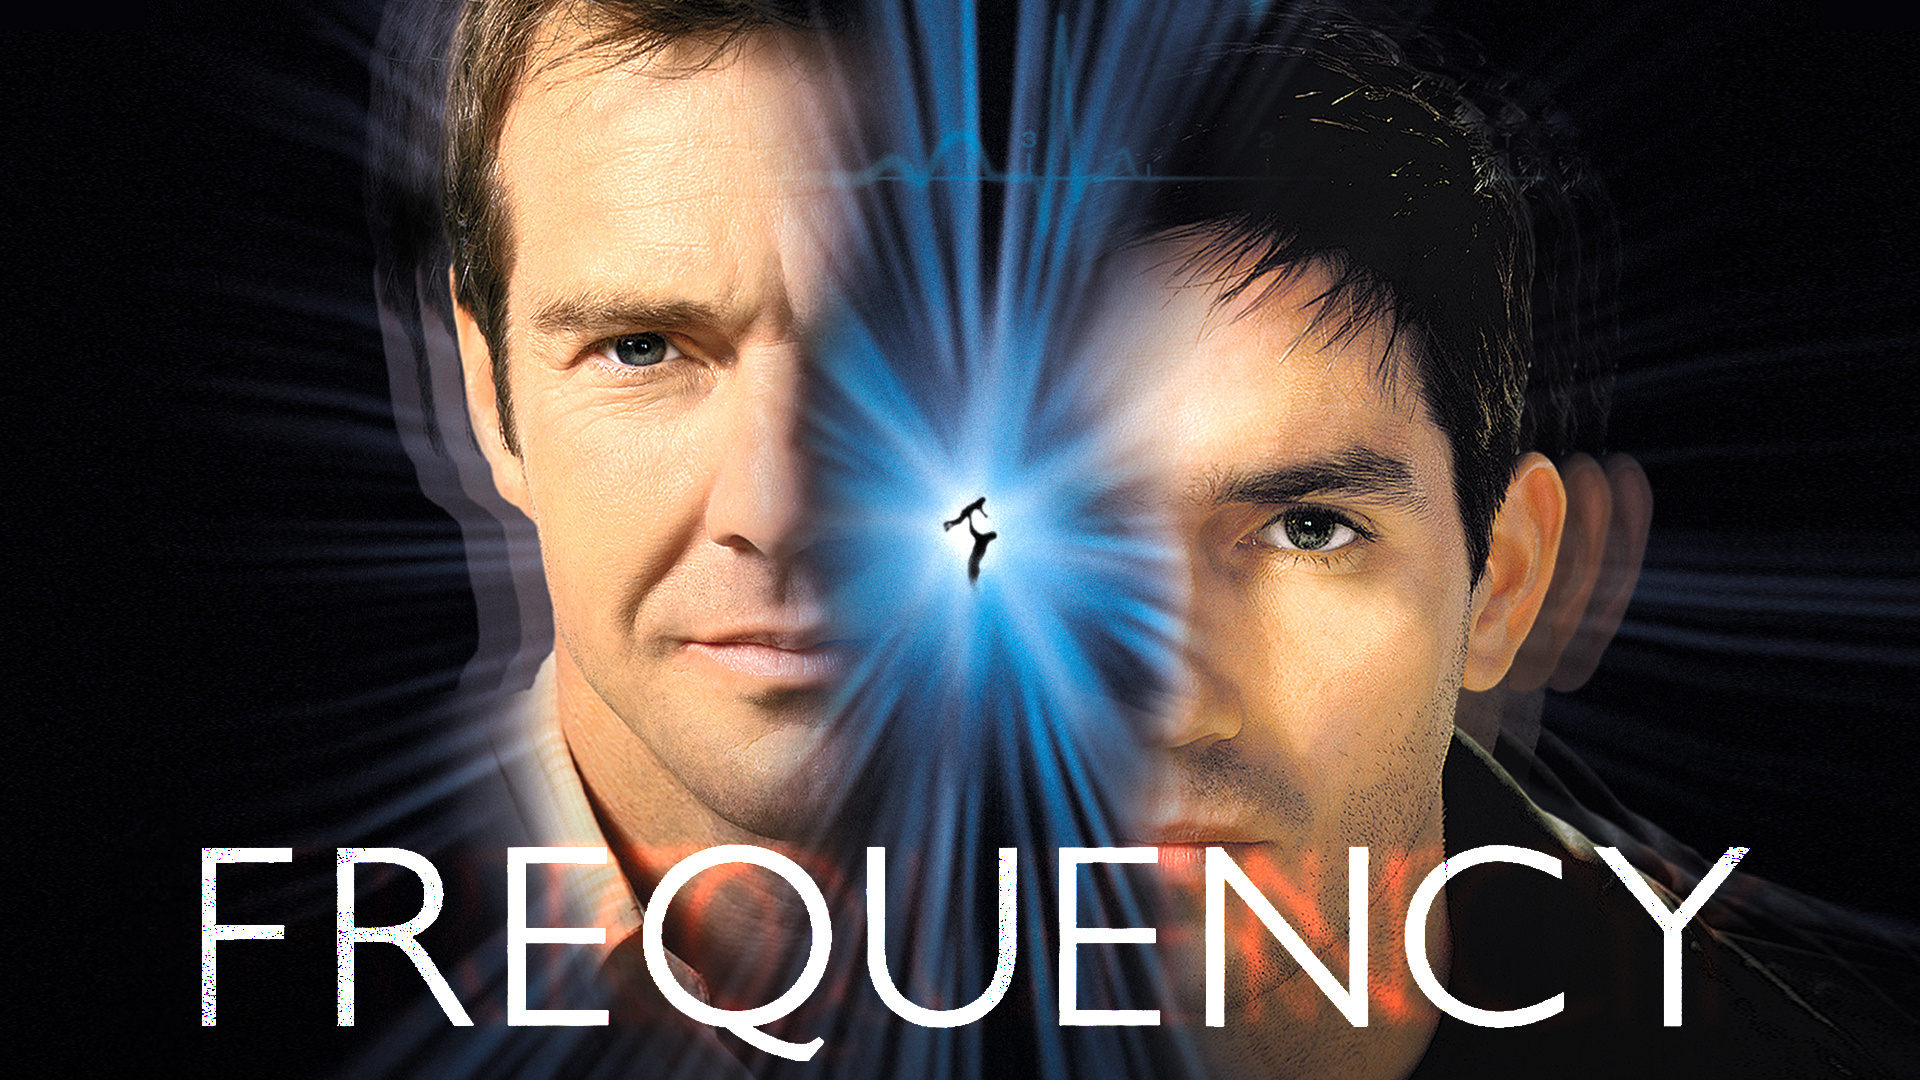 Frequency (Movie): Frank Sullivan, a firefighter, Science fiction thriller drama film. 1920x1080 Full HD Background.